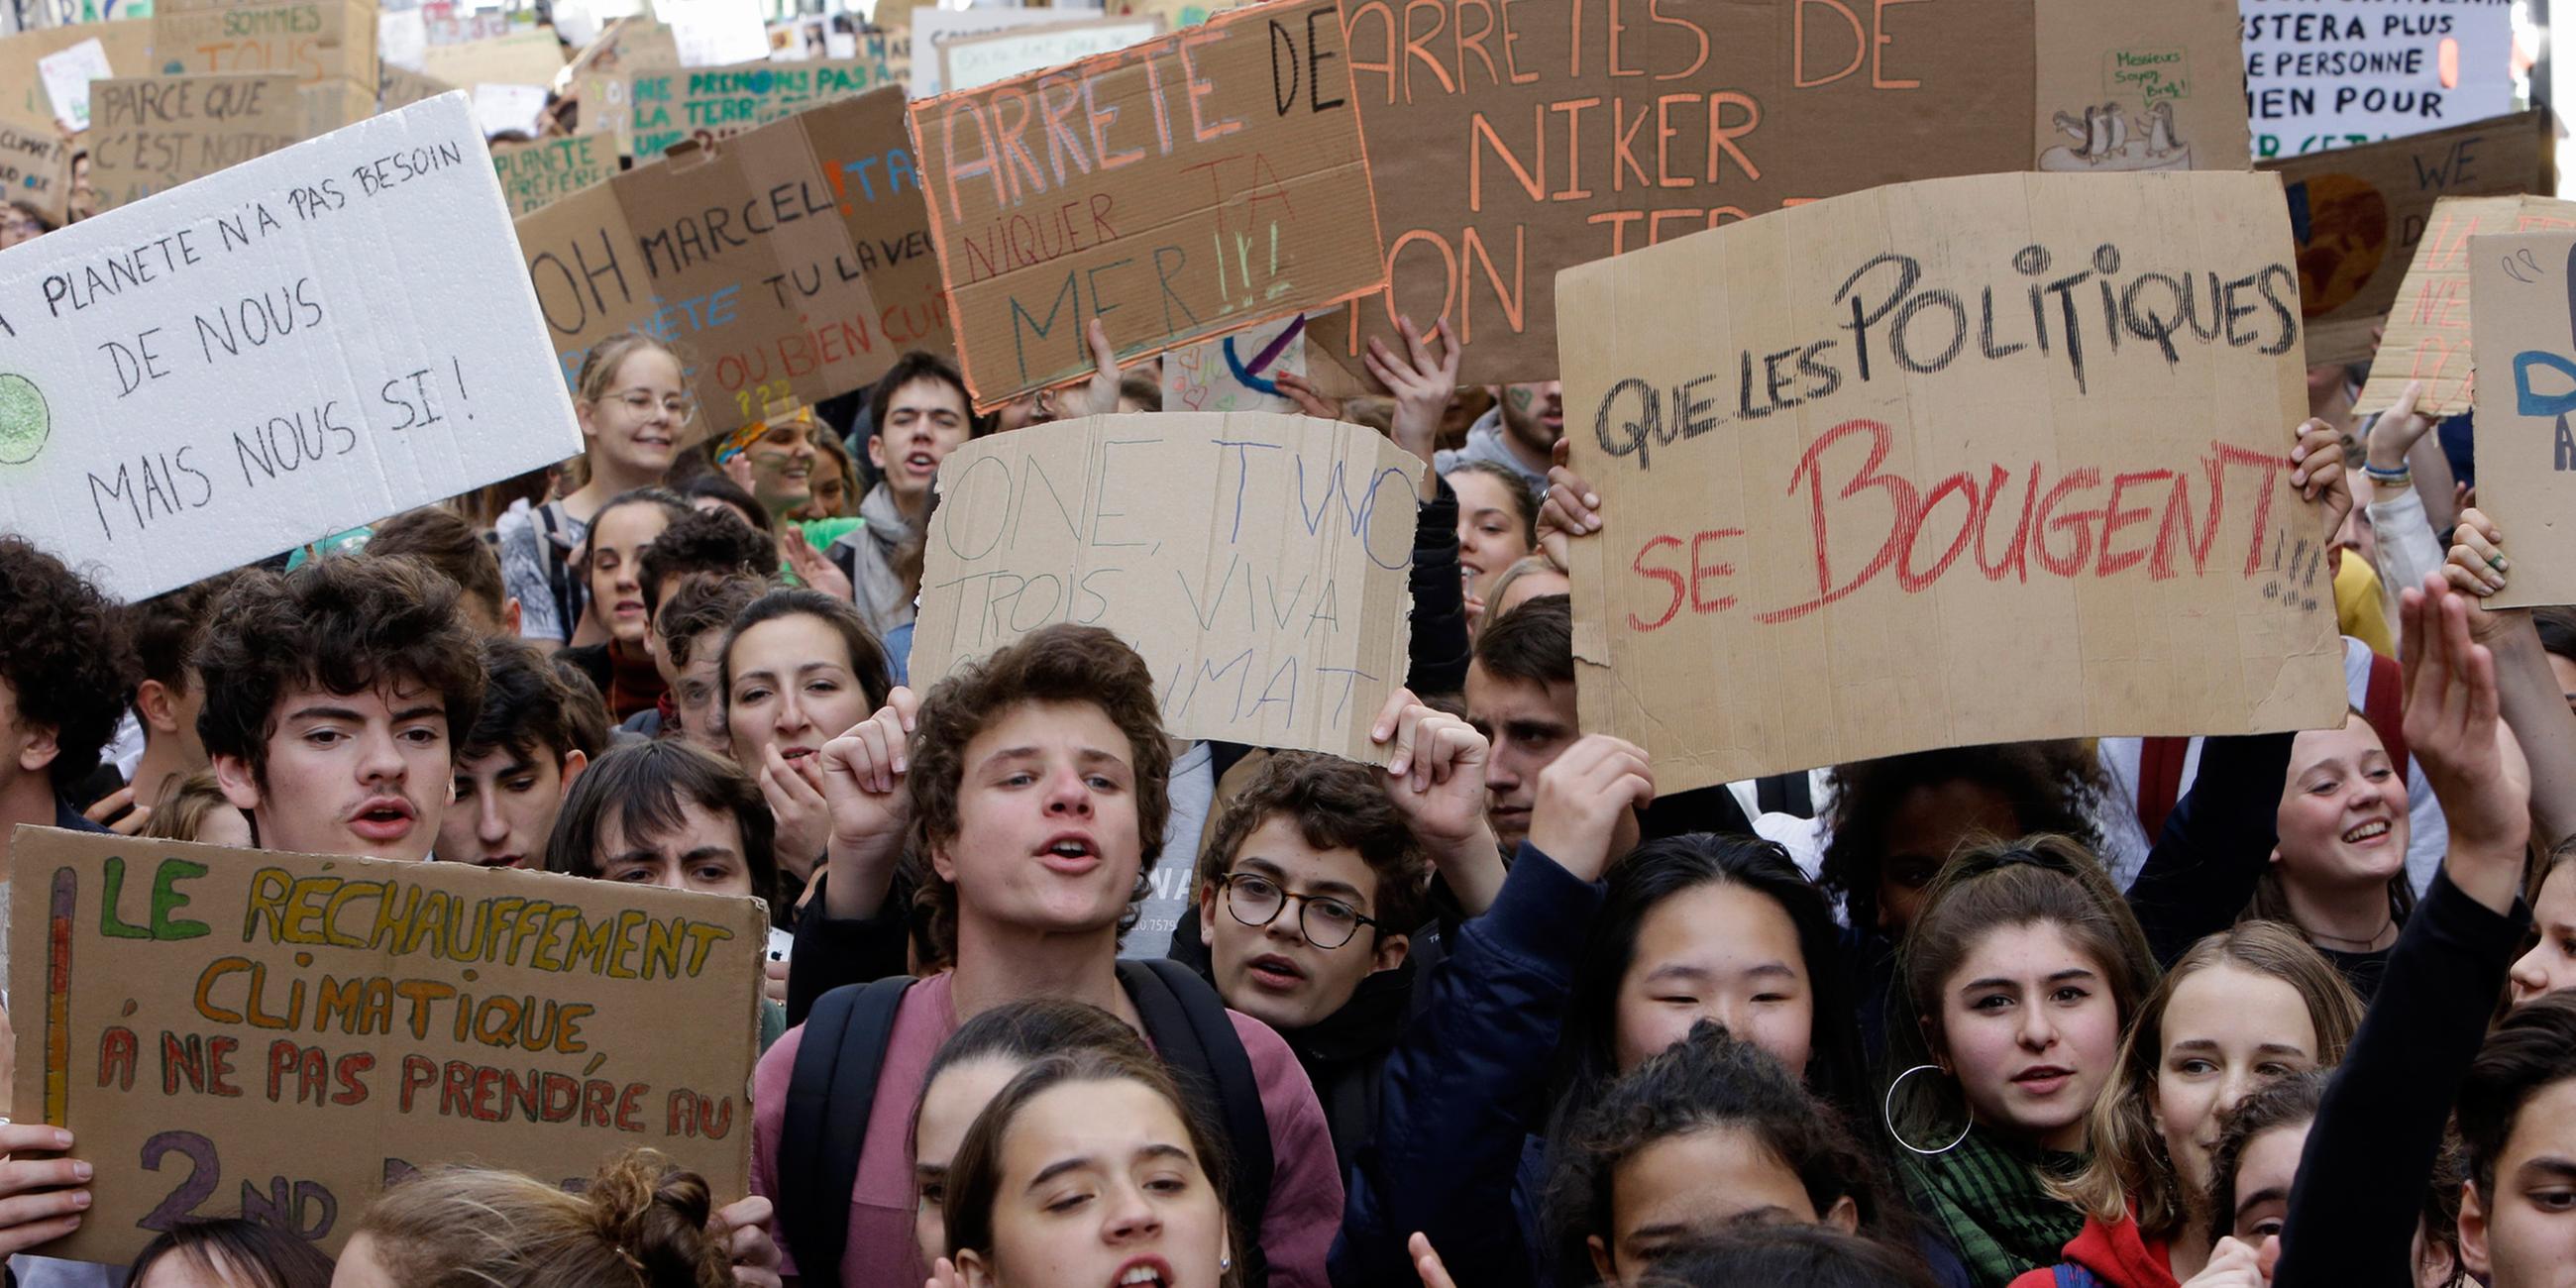 "Fridays for Future"-Demonstration in Marseille am 15.03.2019